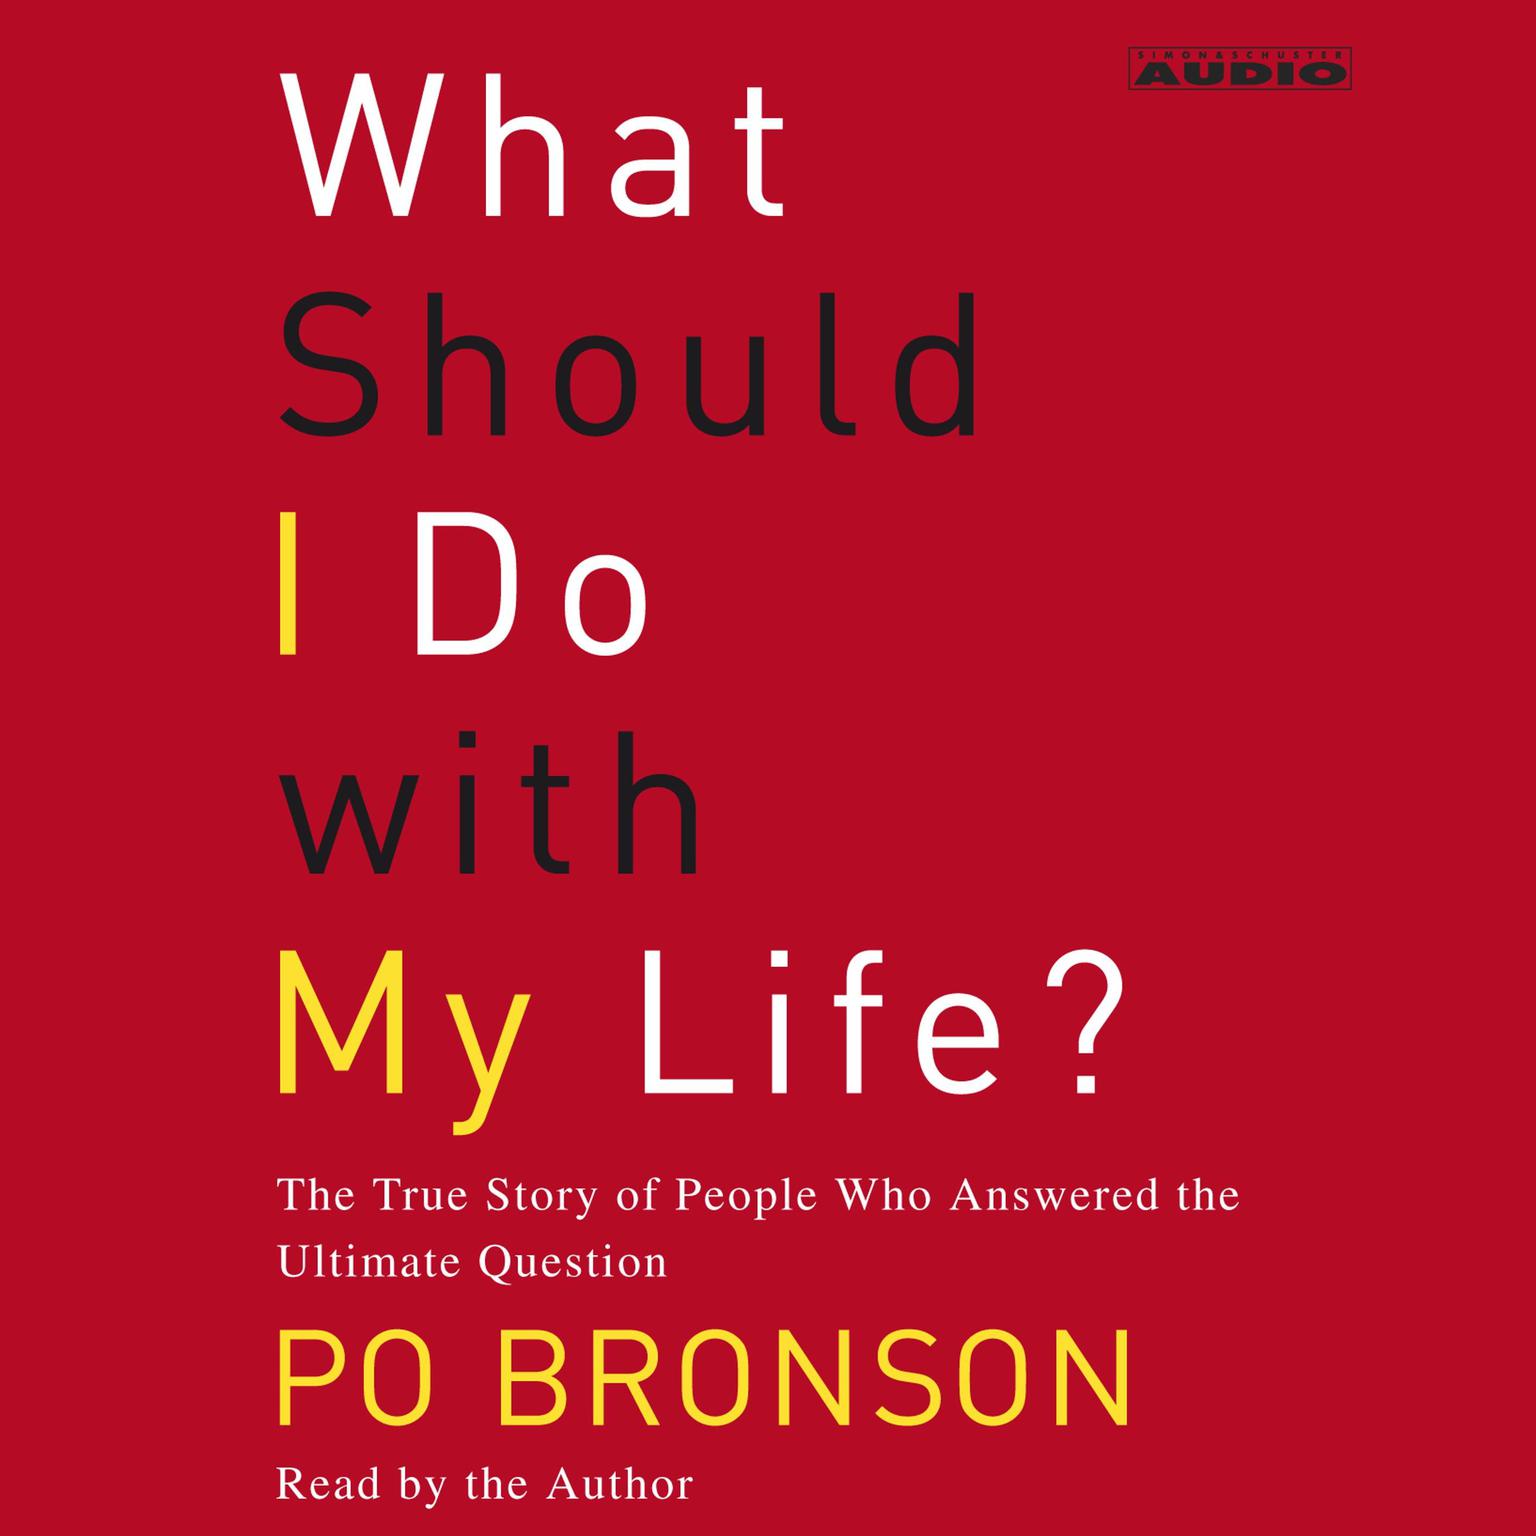 What Should I Do With My Life? (Abridged): The True Story of People Who Answered the Ultimate Question Audiobook, by Po Bronson